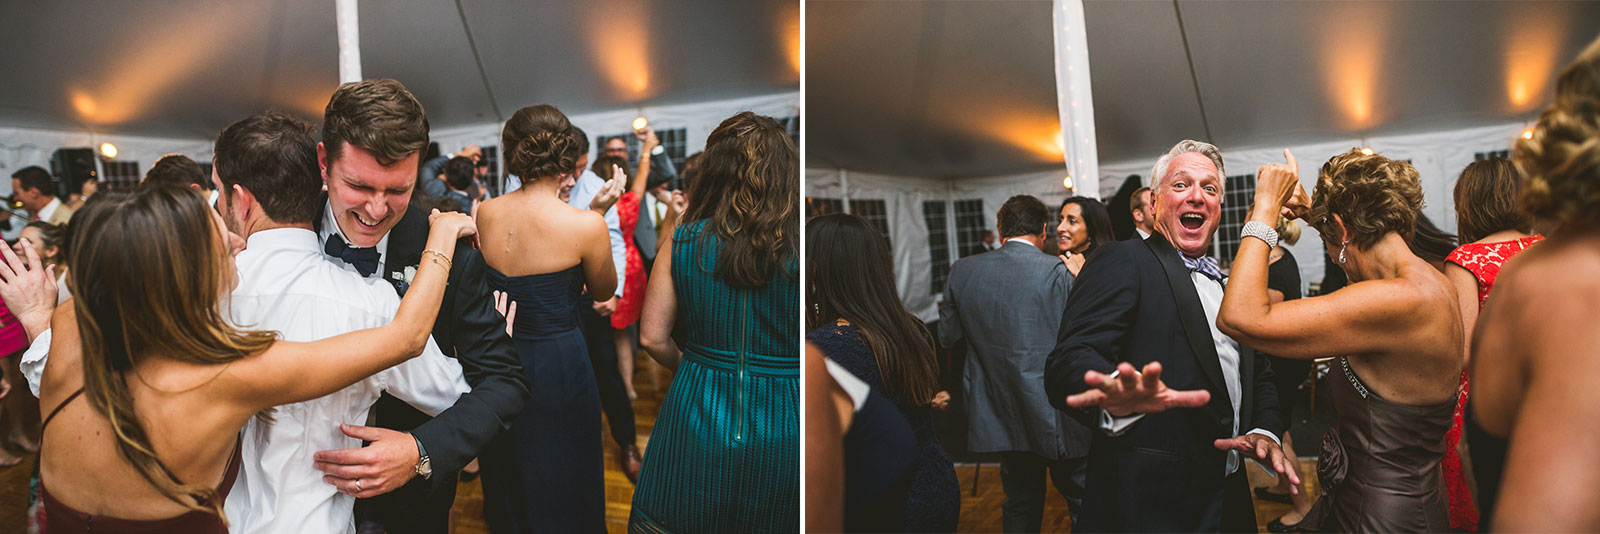 81 party at wedding - Stephanie + Zack // Conway Farms Chicago Wedding Photographers